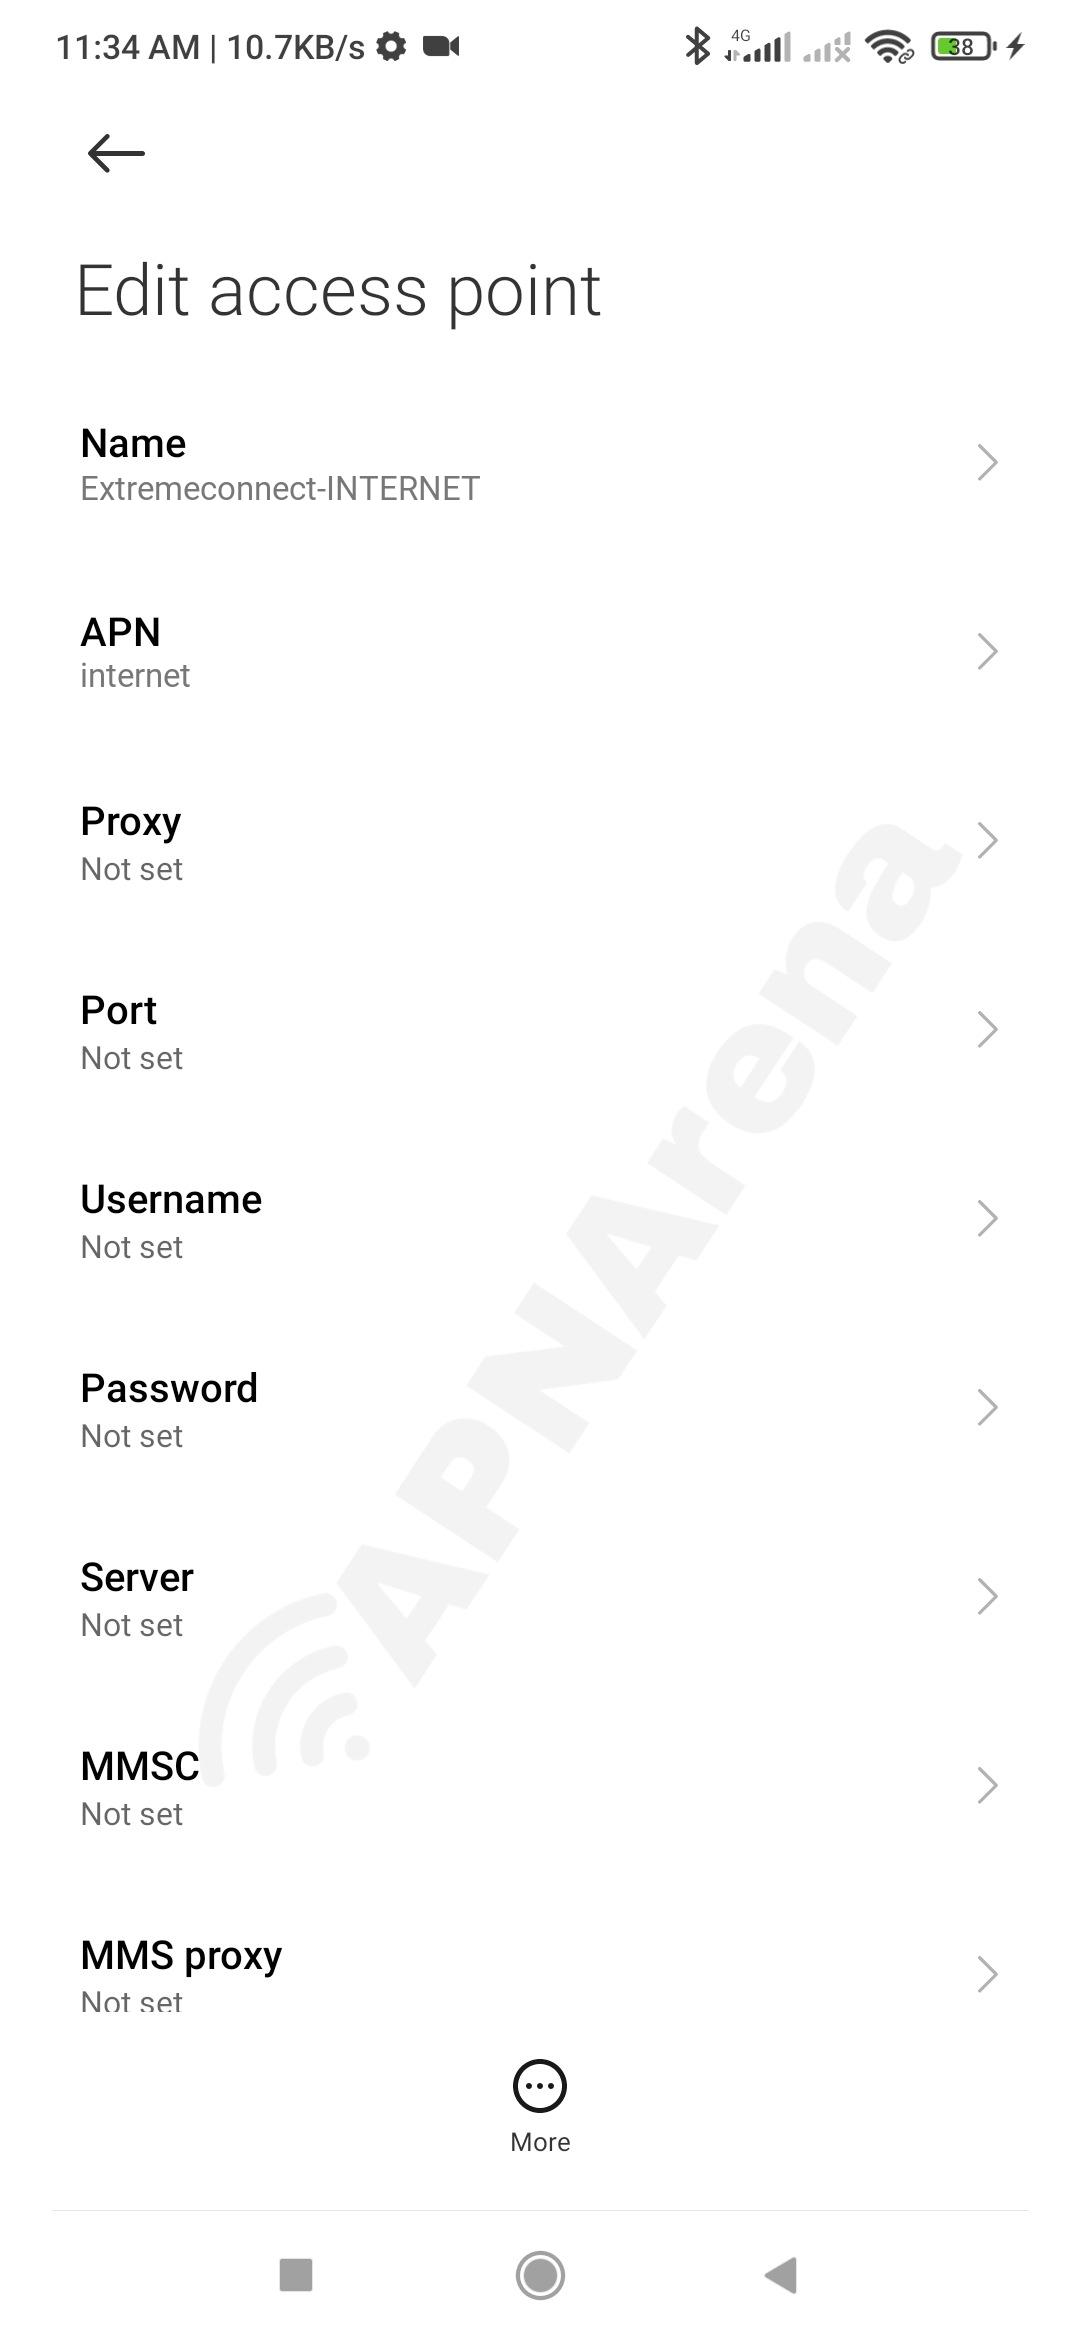 EXTREMEConnect .me APN Settings for Android